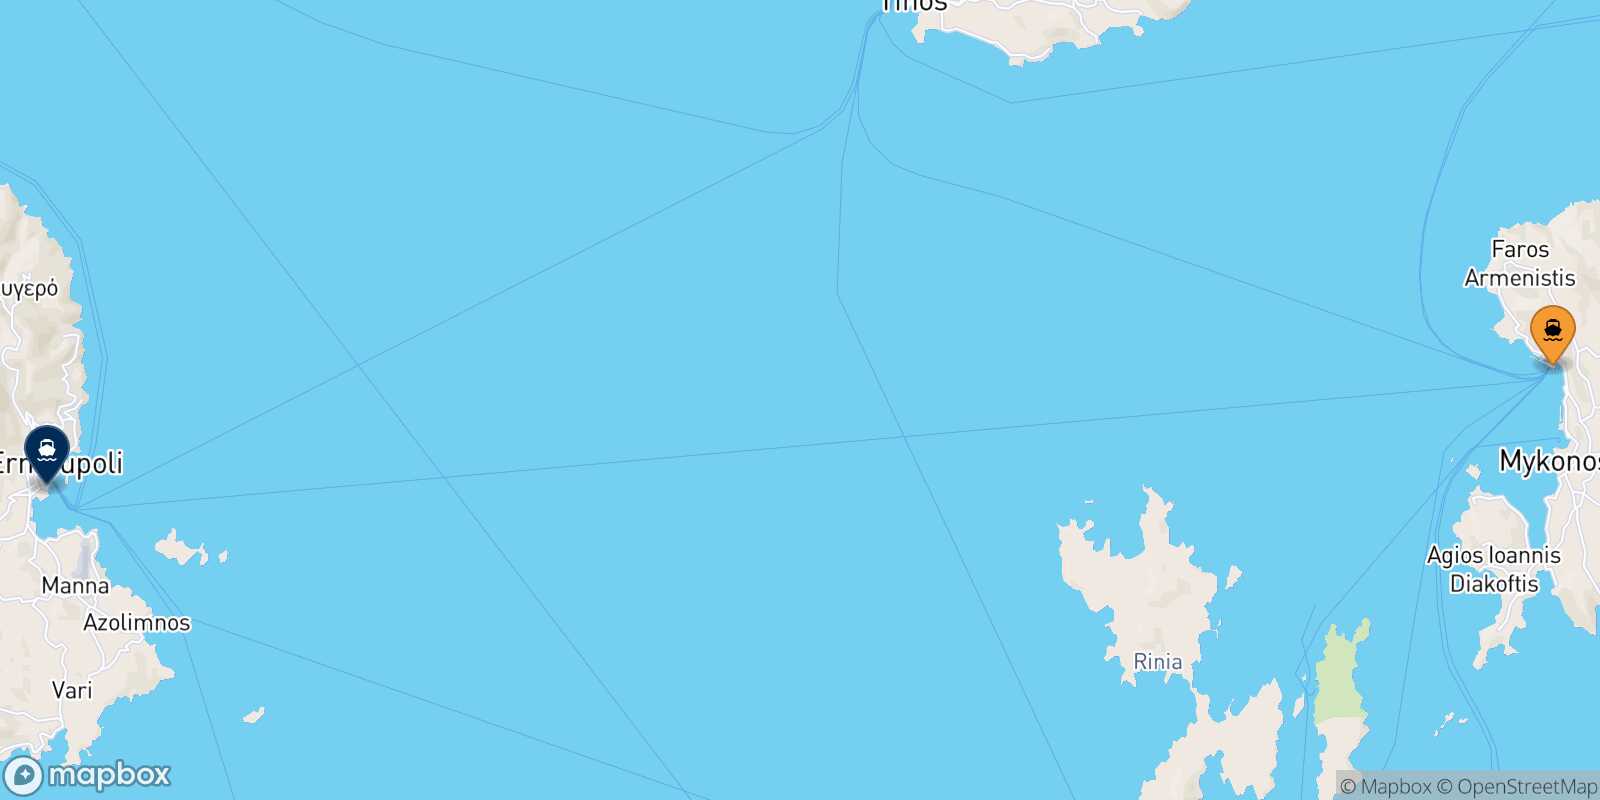 Mykonos Syros route map